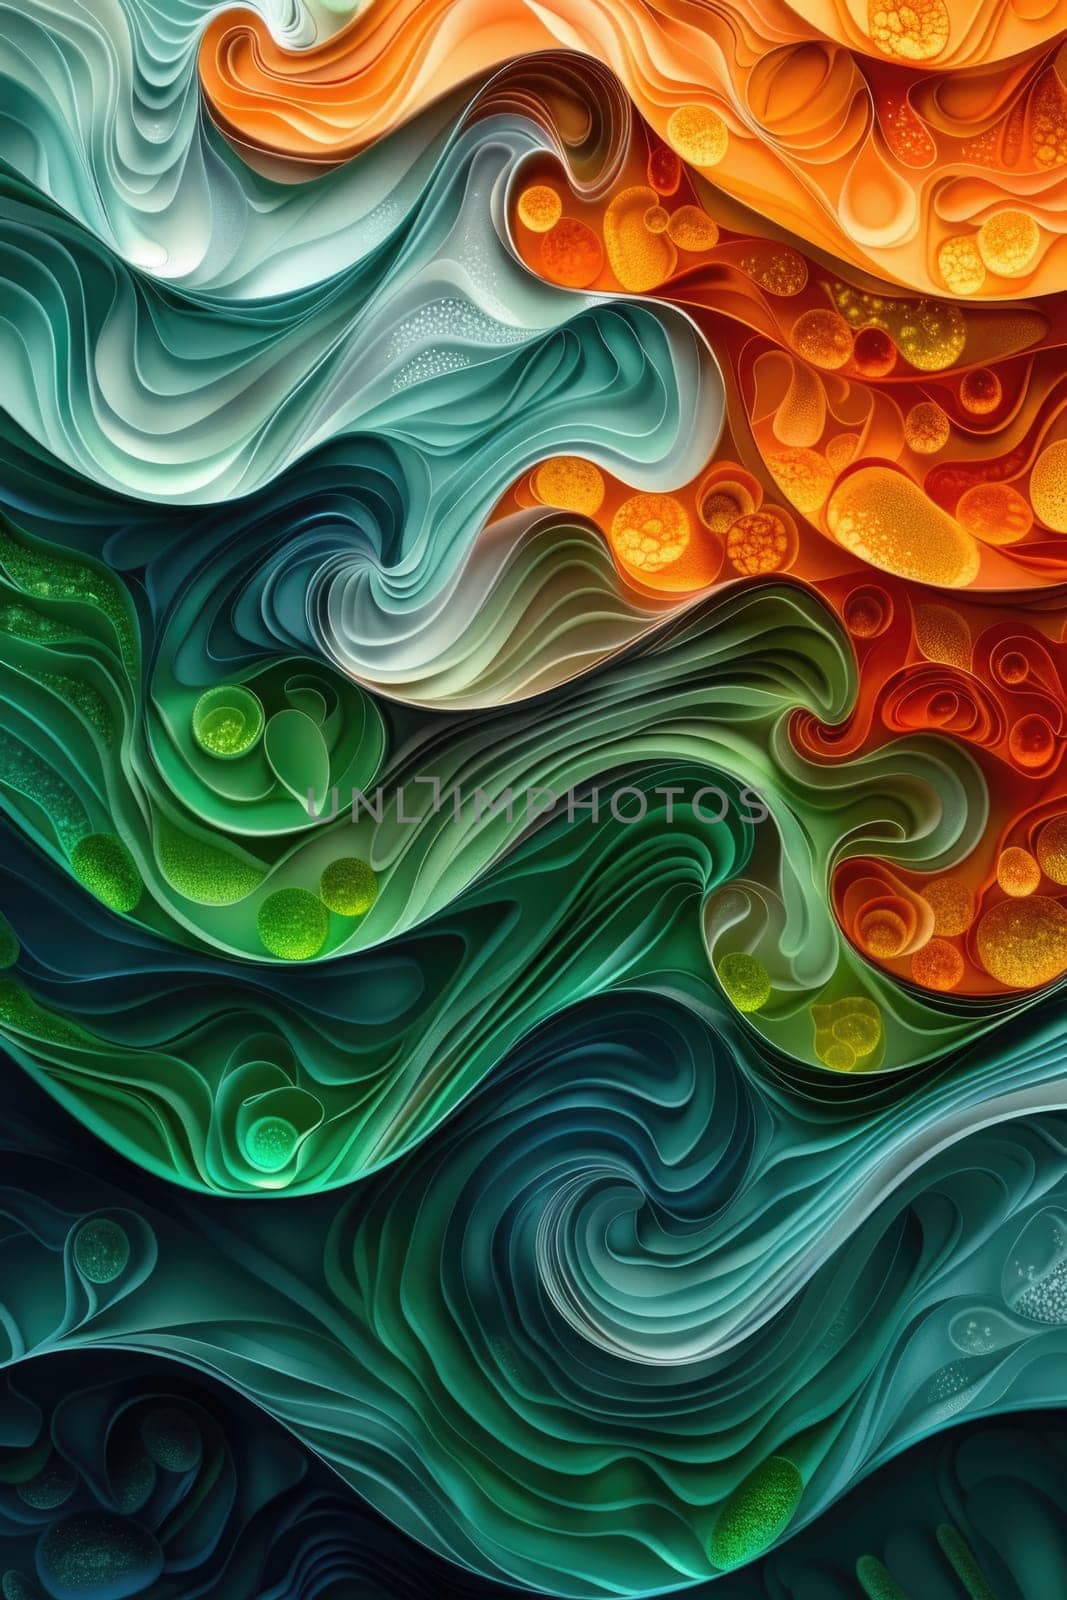 A detailed hyper-realistic painting featuring a wave in striking orange and green colors, showcasing intricate details and textures.